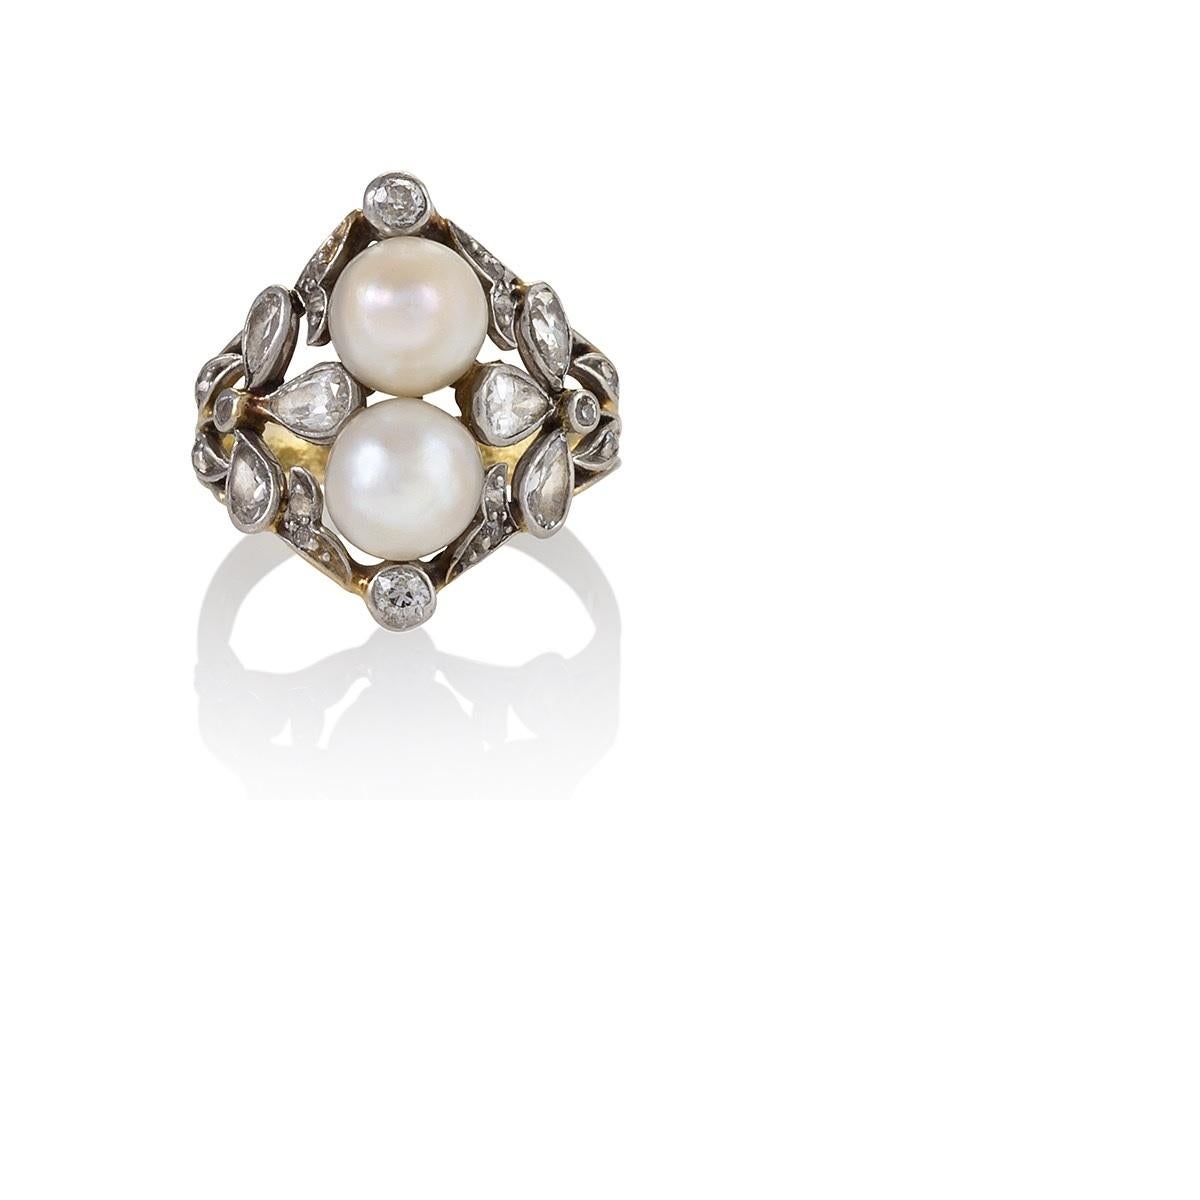 An Edwardian ring featuring two pearls and 22 diamonds set in platinum, with an 18 karat gold shank. The two pearls, which stack up the finger, are elegantly framed by a naturalistic motif echoing the form of a clover made of pear-cut diamonds. The